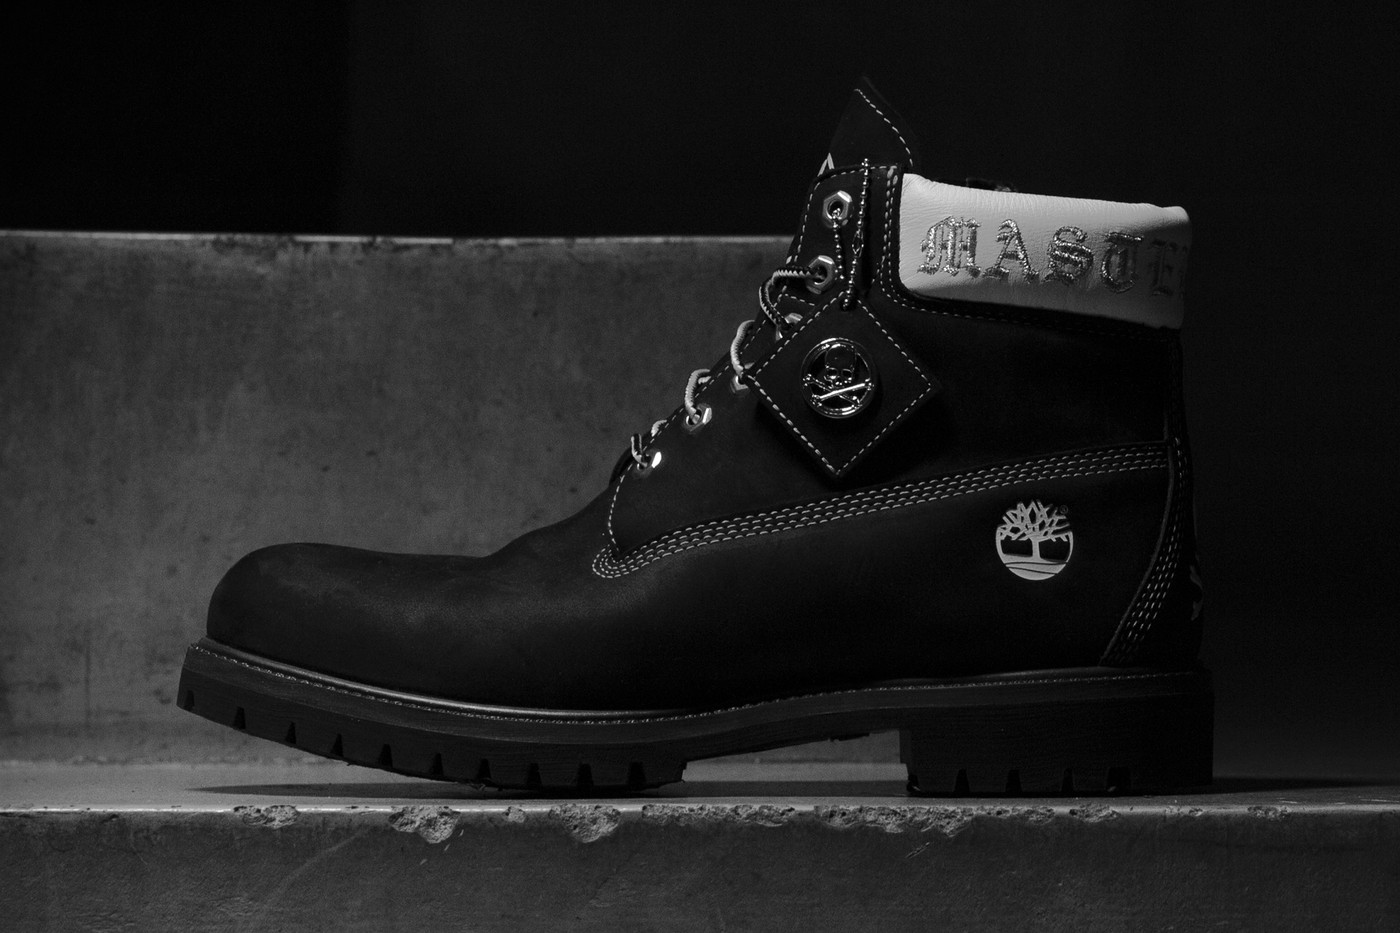 https_hypebeast.comimage201809timberland-mastermind-world-fall-winter-2018-capsule-13